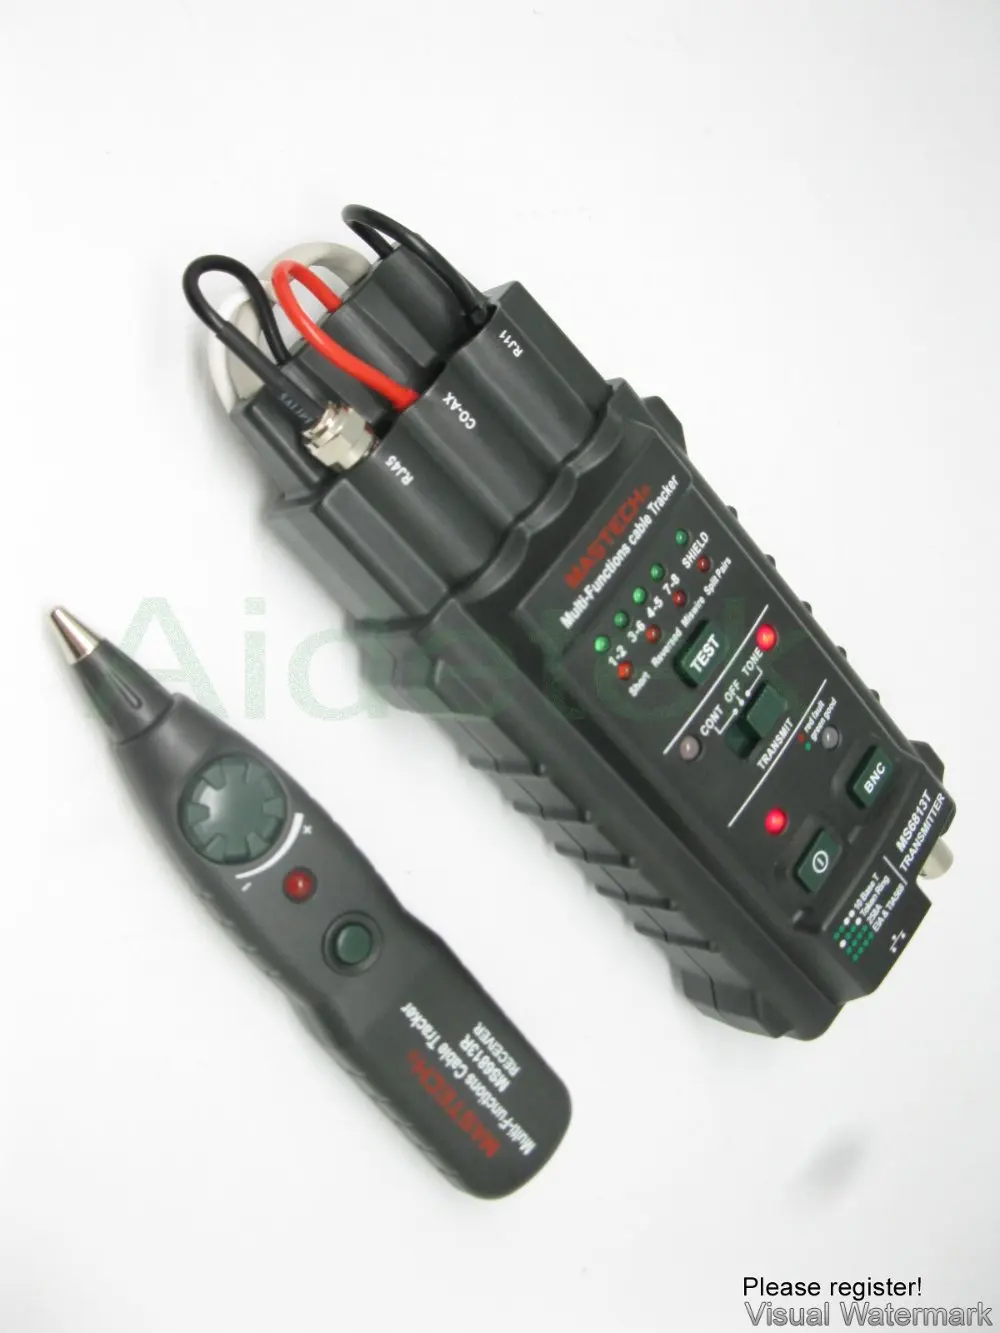 Network & Telephone Cable Tester Detector Finder Tracker MS6813 RJ45 RJ11 COAX 